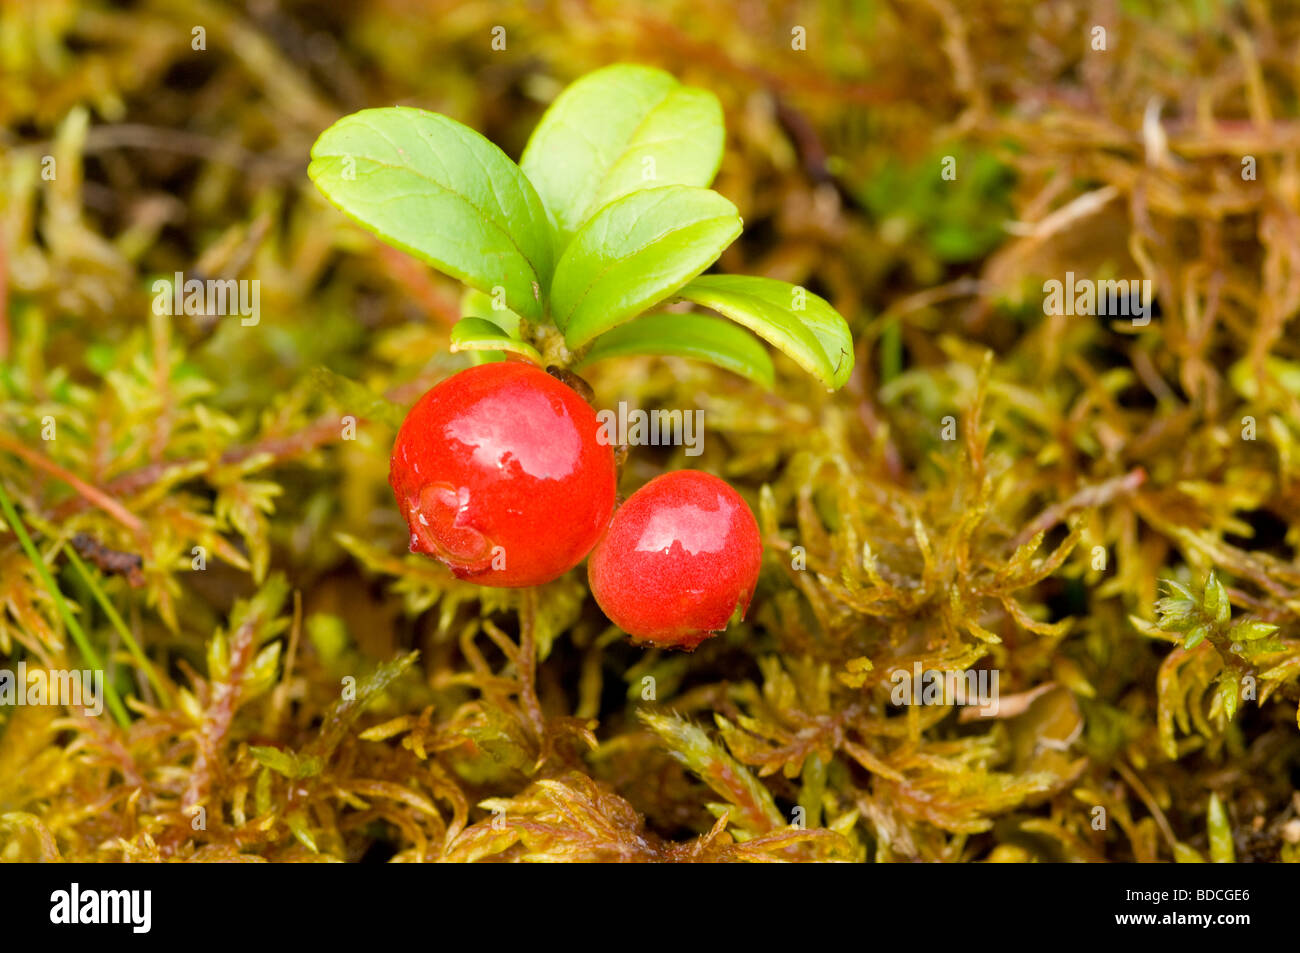 Cowberry or Lingonberry, Vaccinium vitis-idaea, two red berries. The moss is Hylocomium splendens. Stock Photo